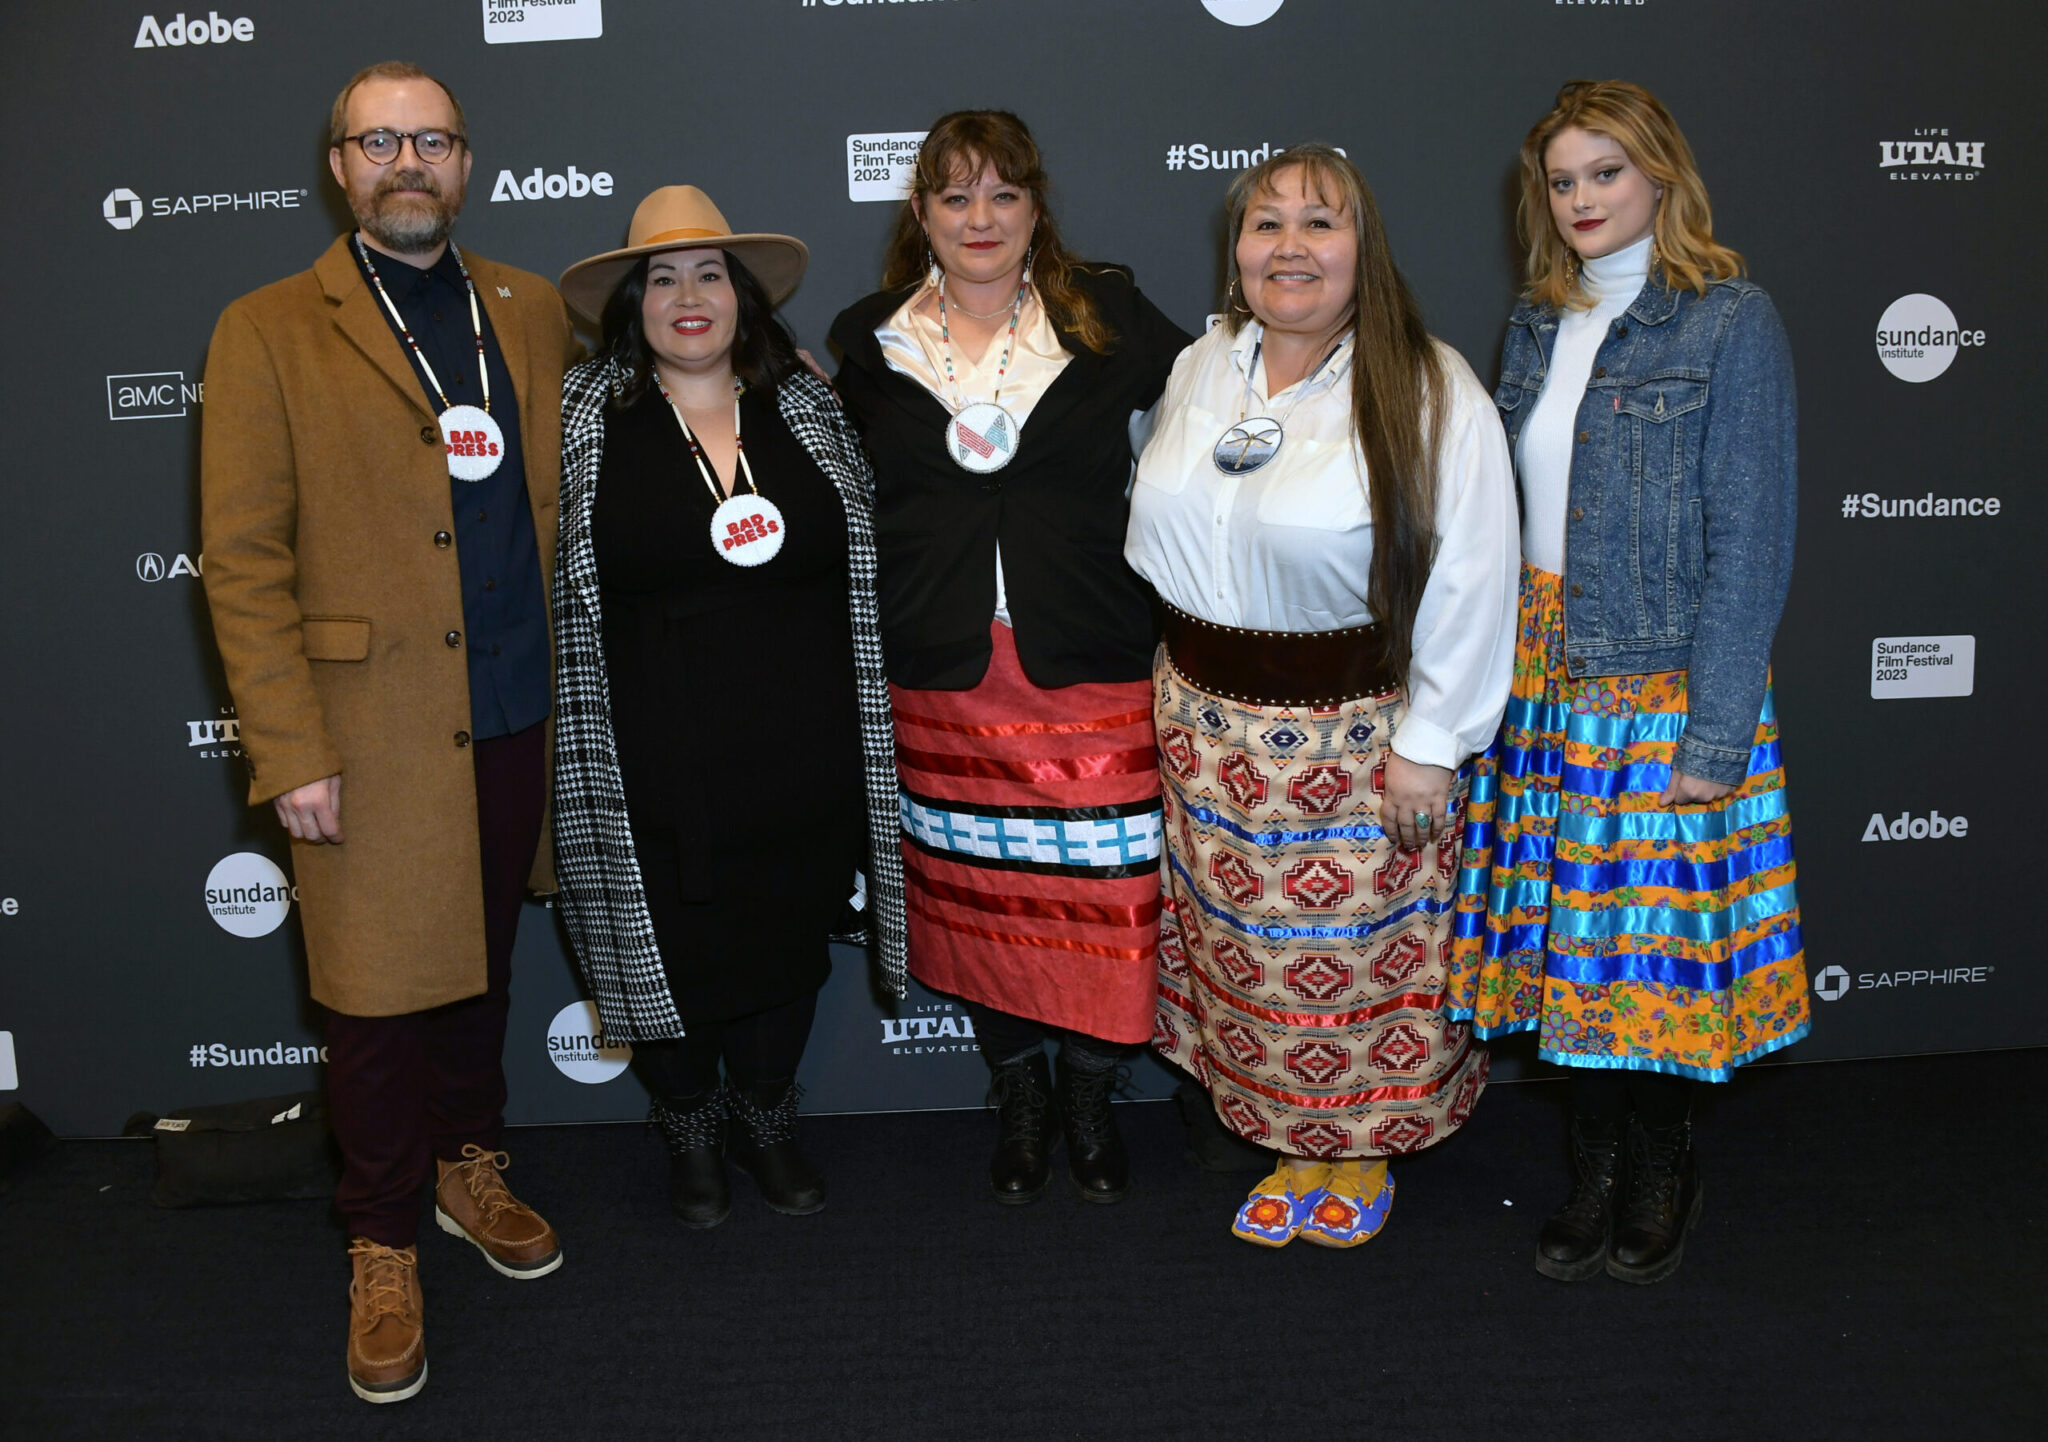 A bearded man with glasses and brown hair in a brown jacket over a blue shirt, a woman with black hair dressed in black with a black and white jacket and a brown hat, a woman with brown hair and a black blazer over a white blouse and red skirt, a woman with long brown hair in a white blouse, and a blonde woman in a jean jacket and a white shirt, all stand in front of a step and repeat at the 2023 Sundance Film Festival.